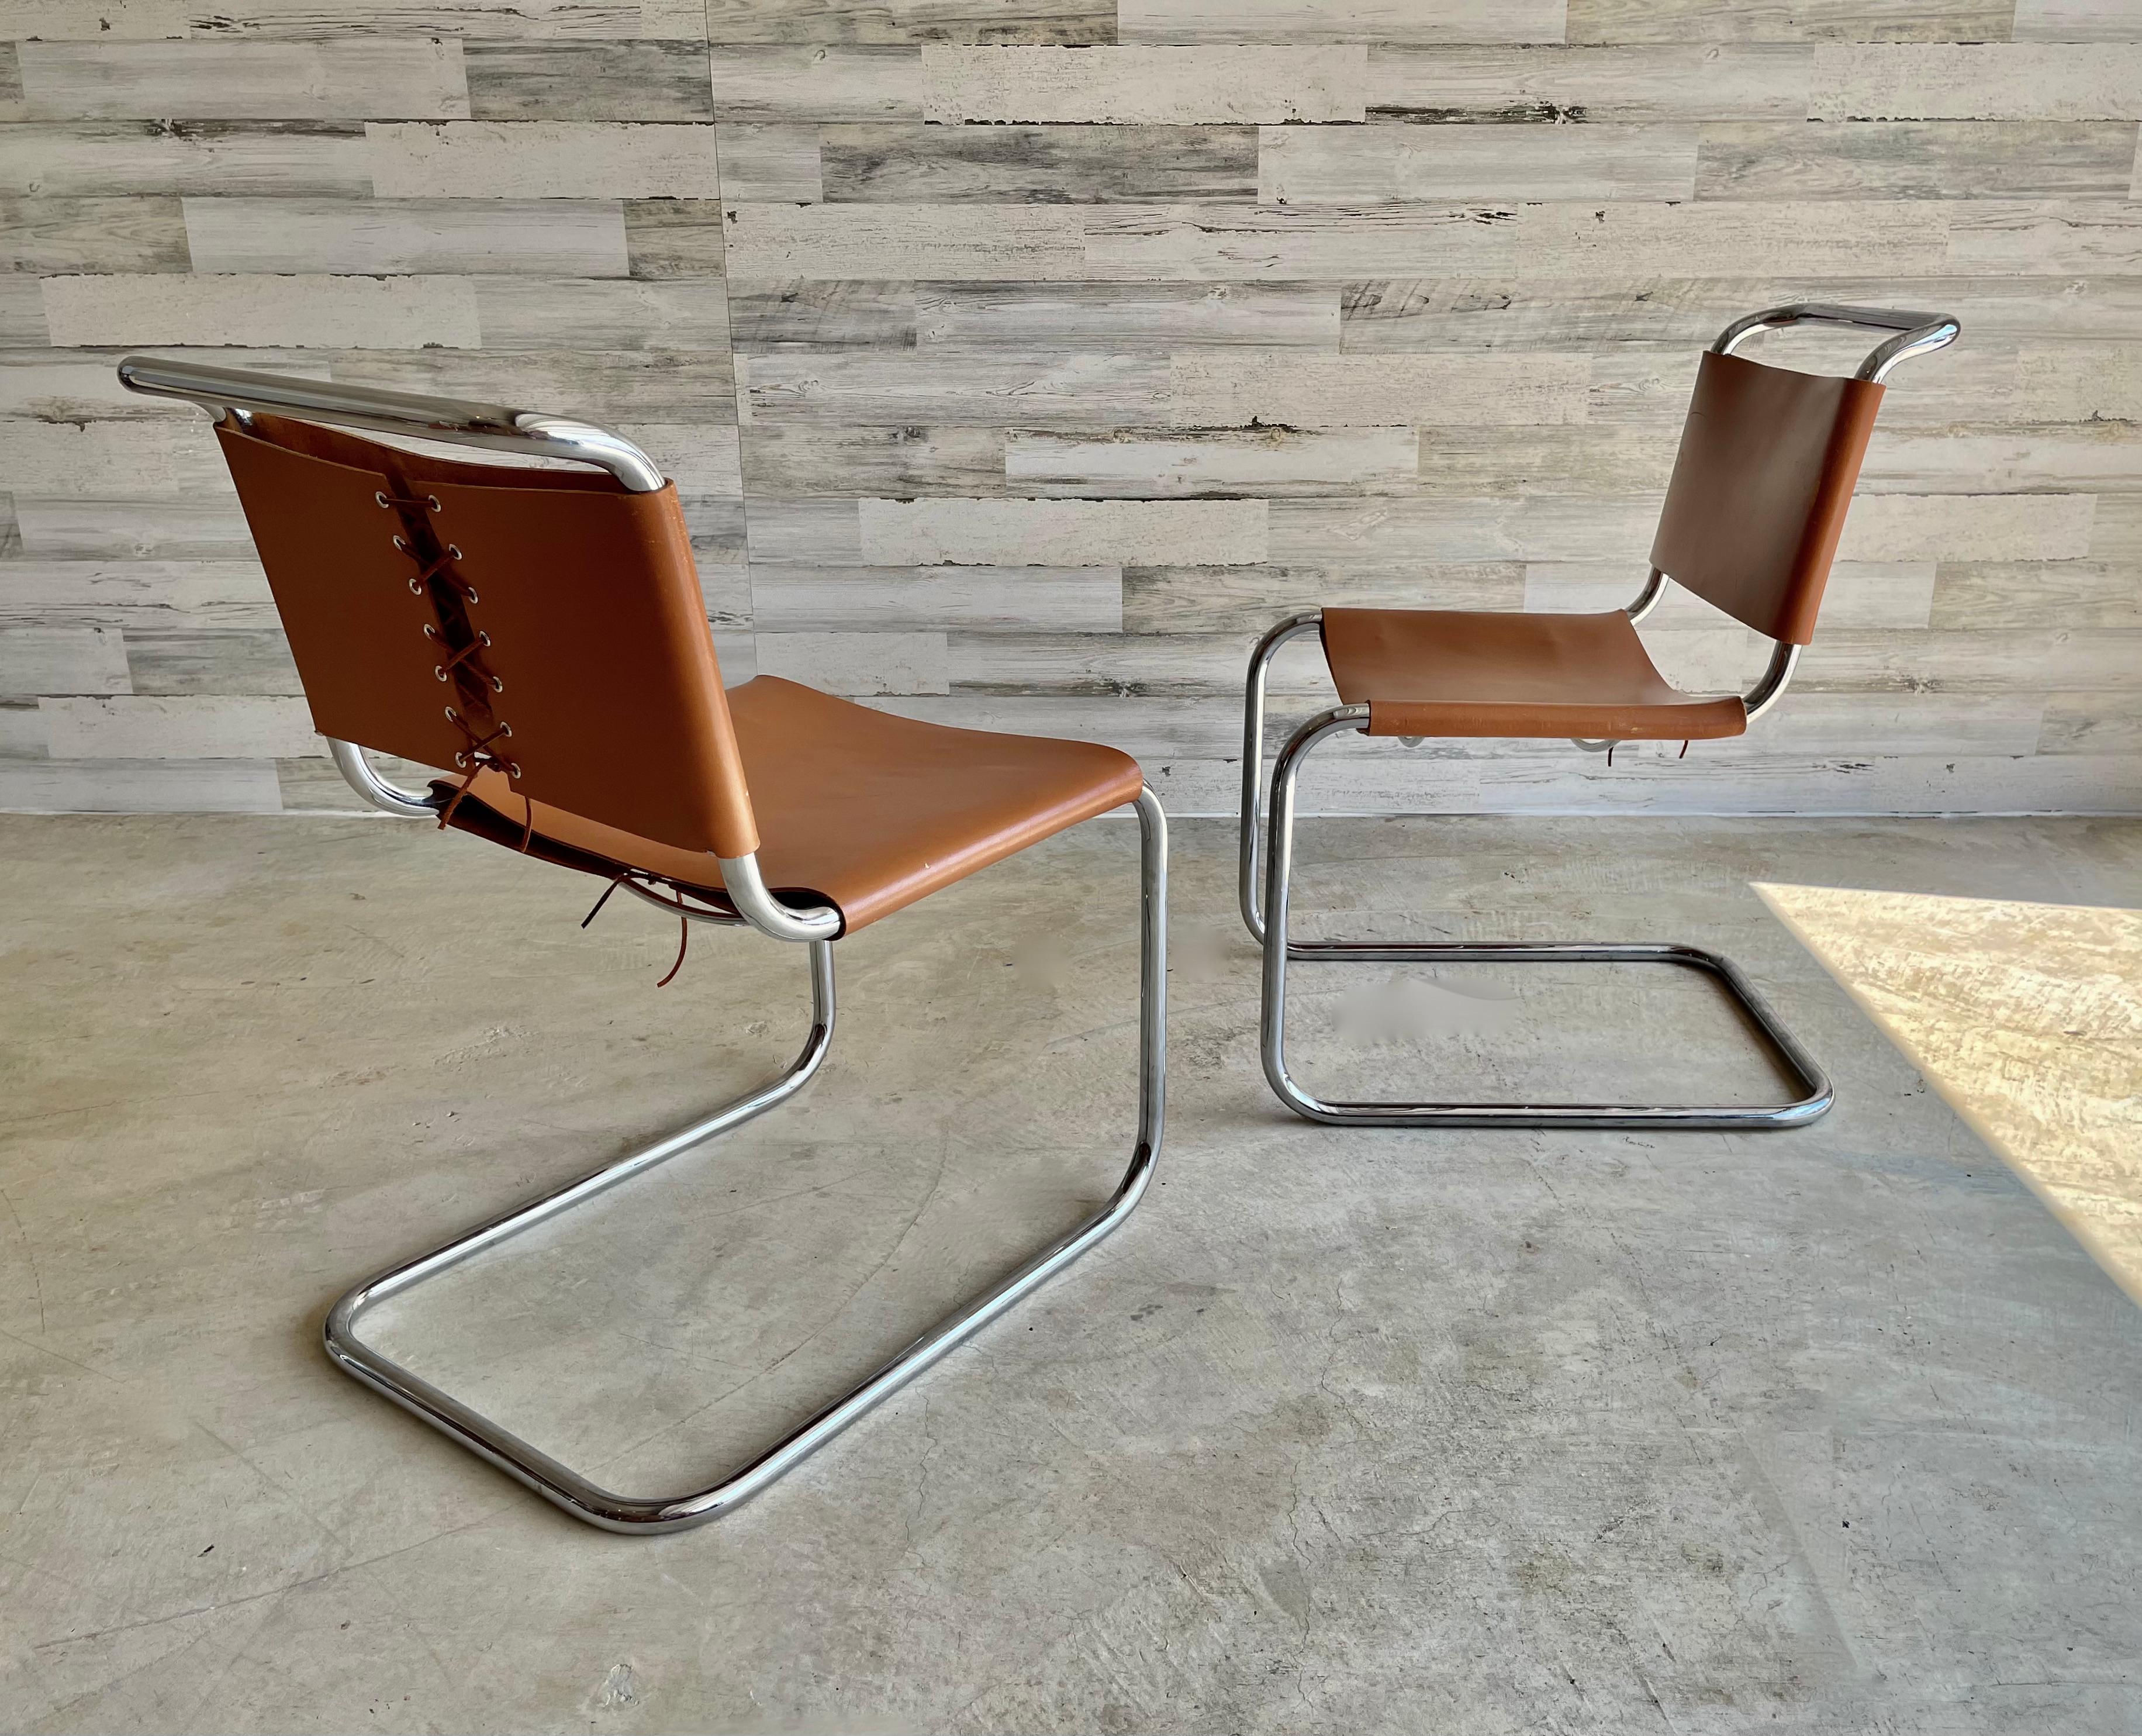 Spoleto dining/ side chairs attributed to Knoll. Chrome cantilever chairs with a cognac/ carmel color leather that is laced with kodiak leather lace.